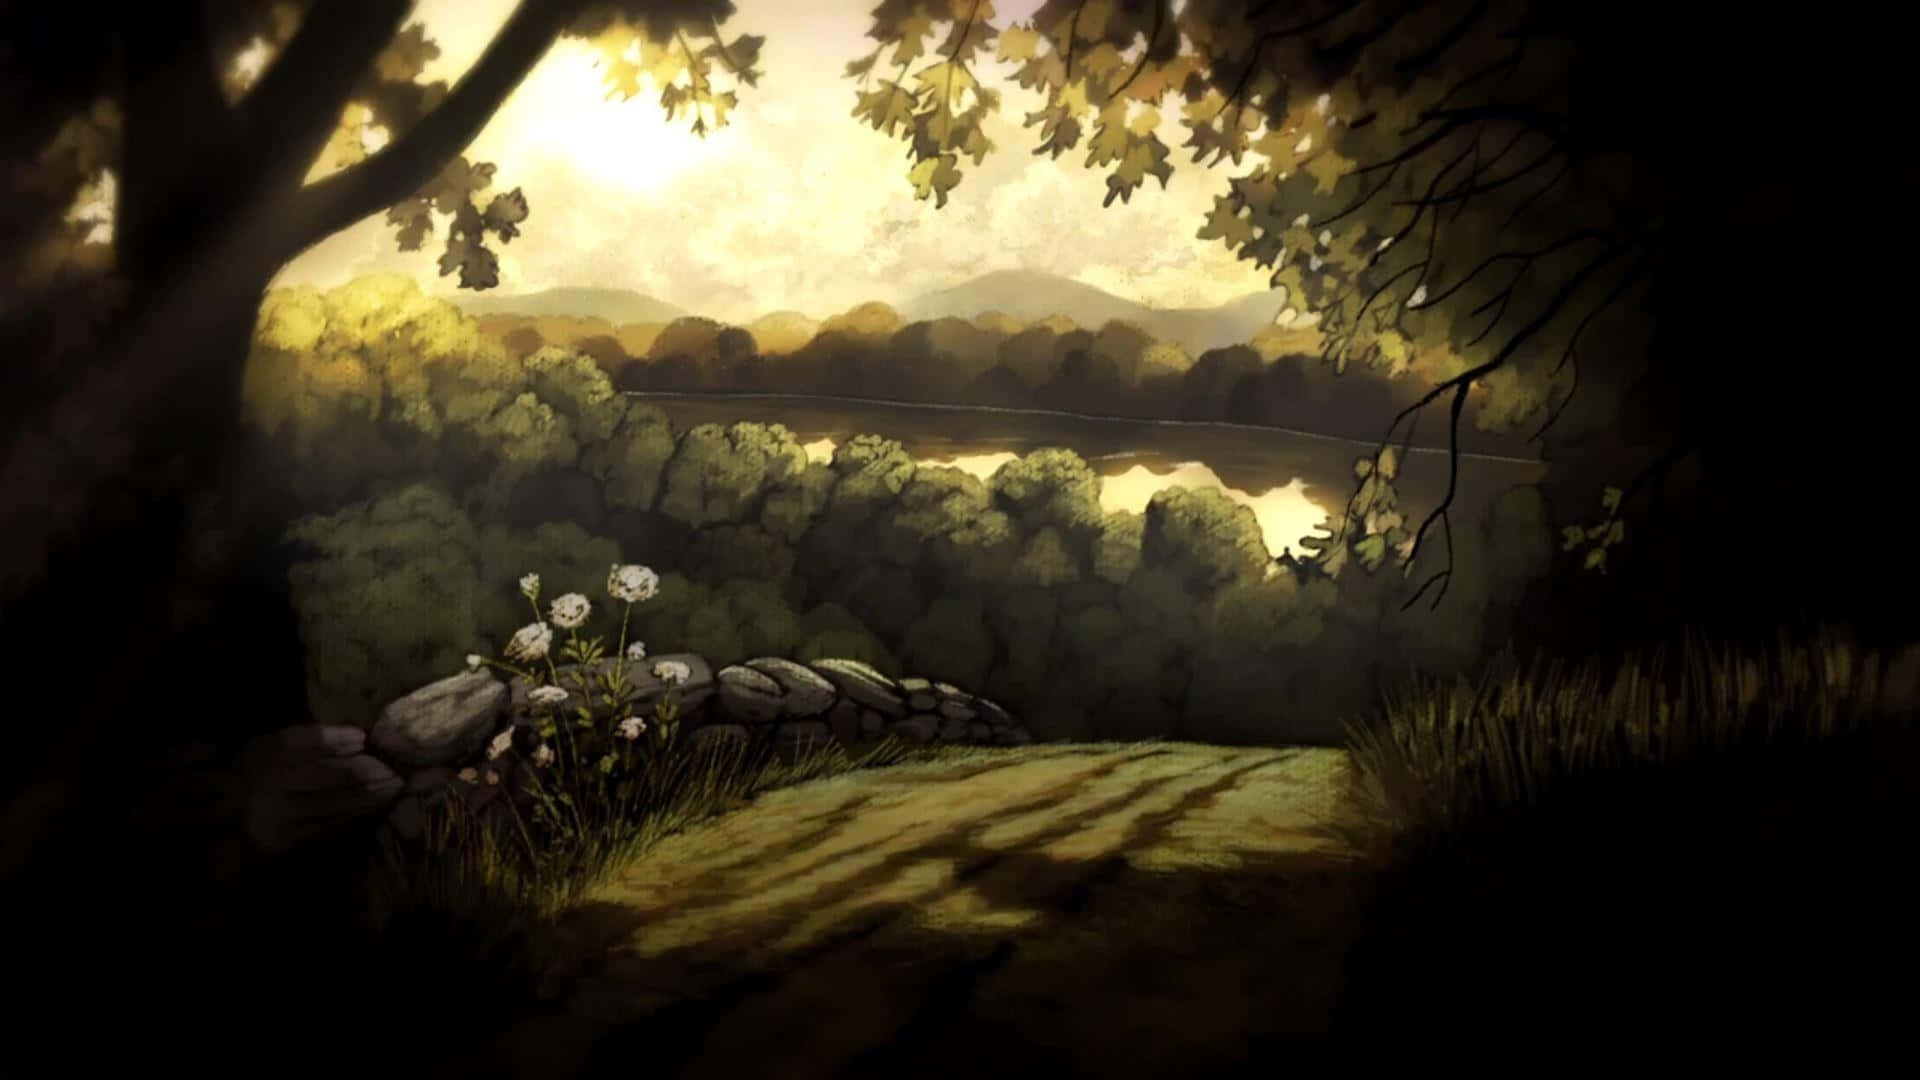 Two brothers explore a dark and twisted world in "Over the Garden Wall"